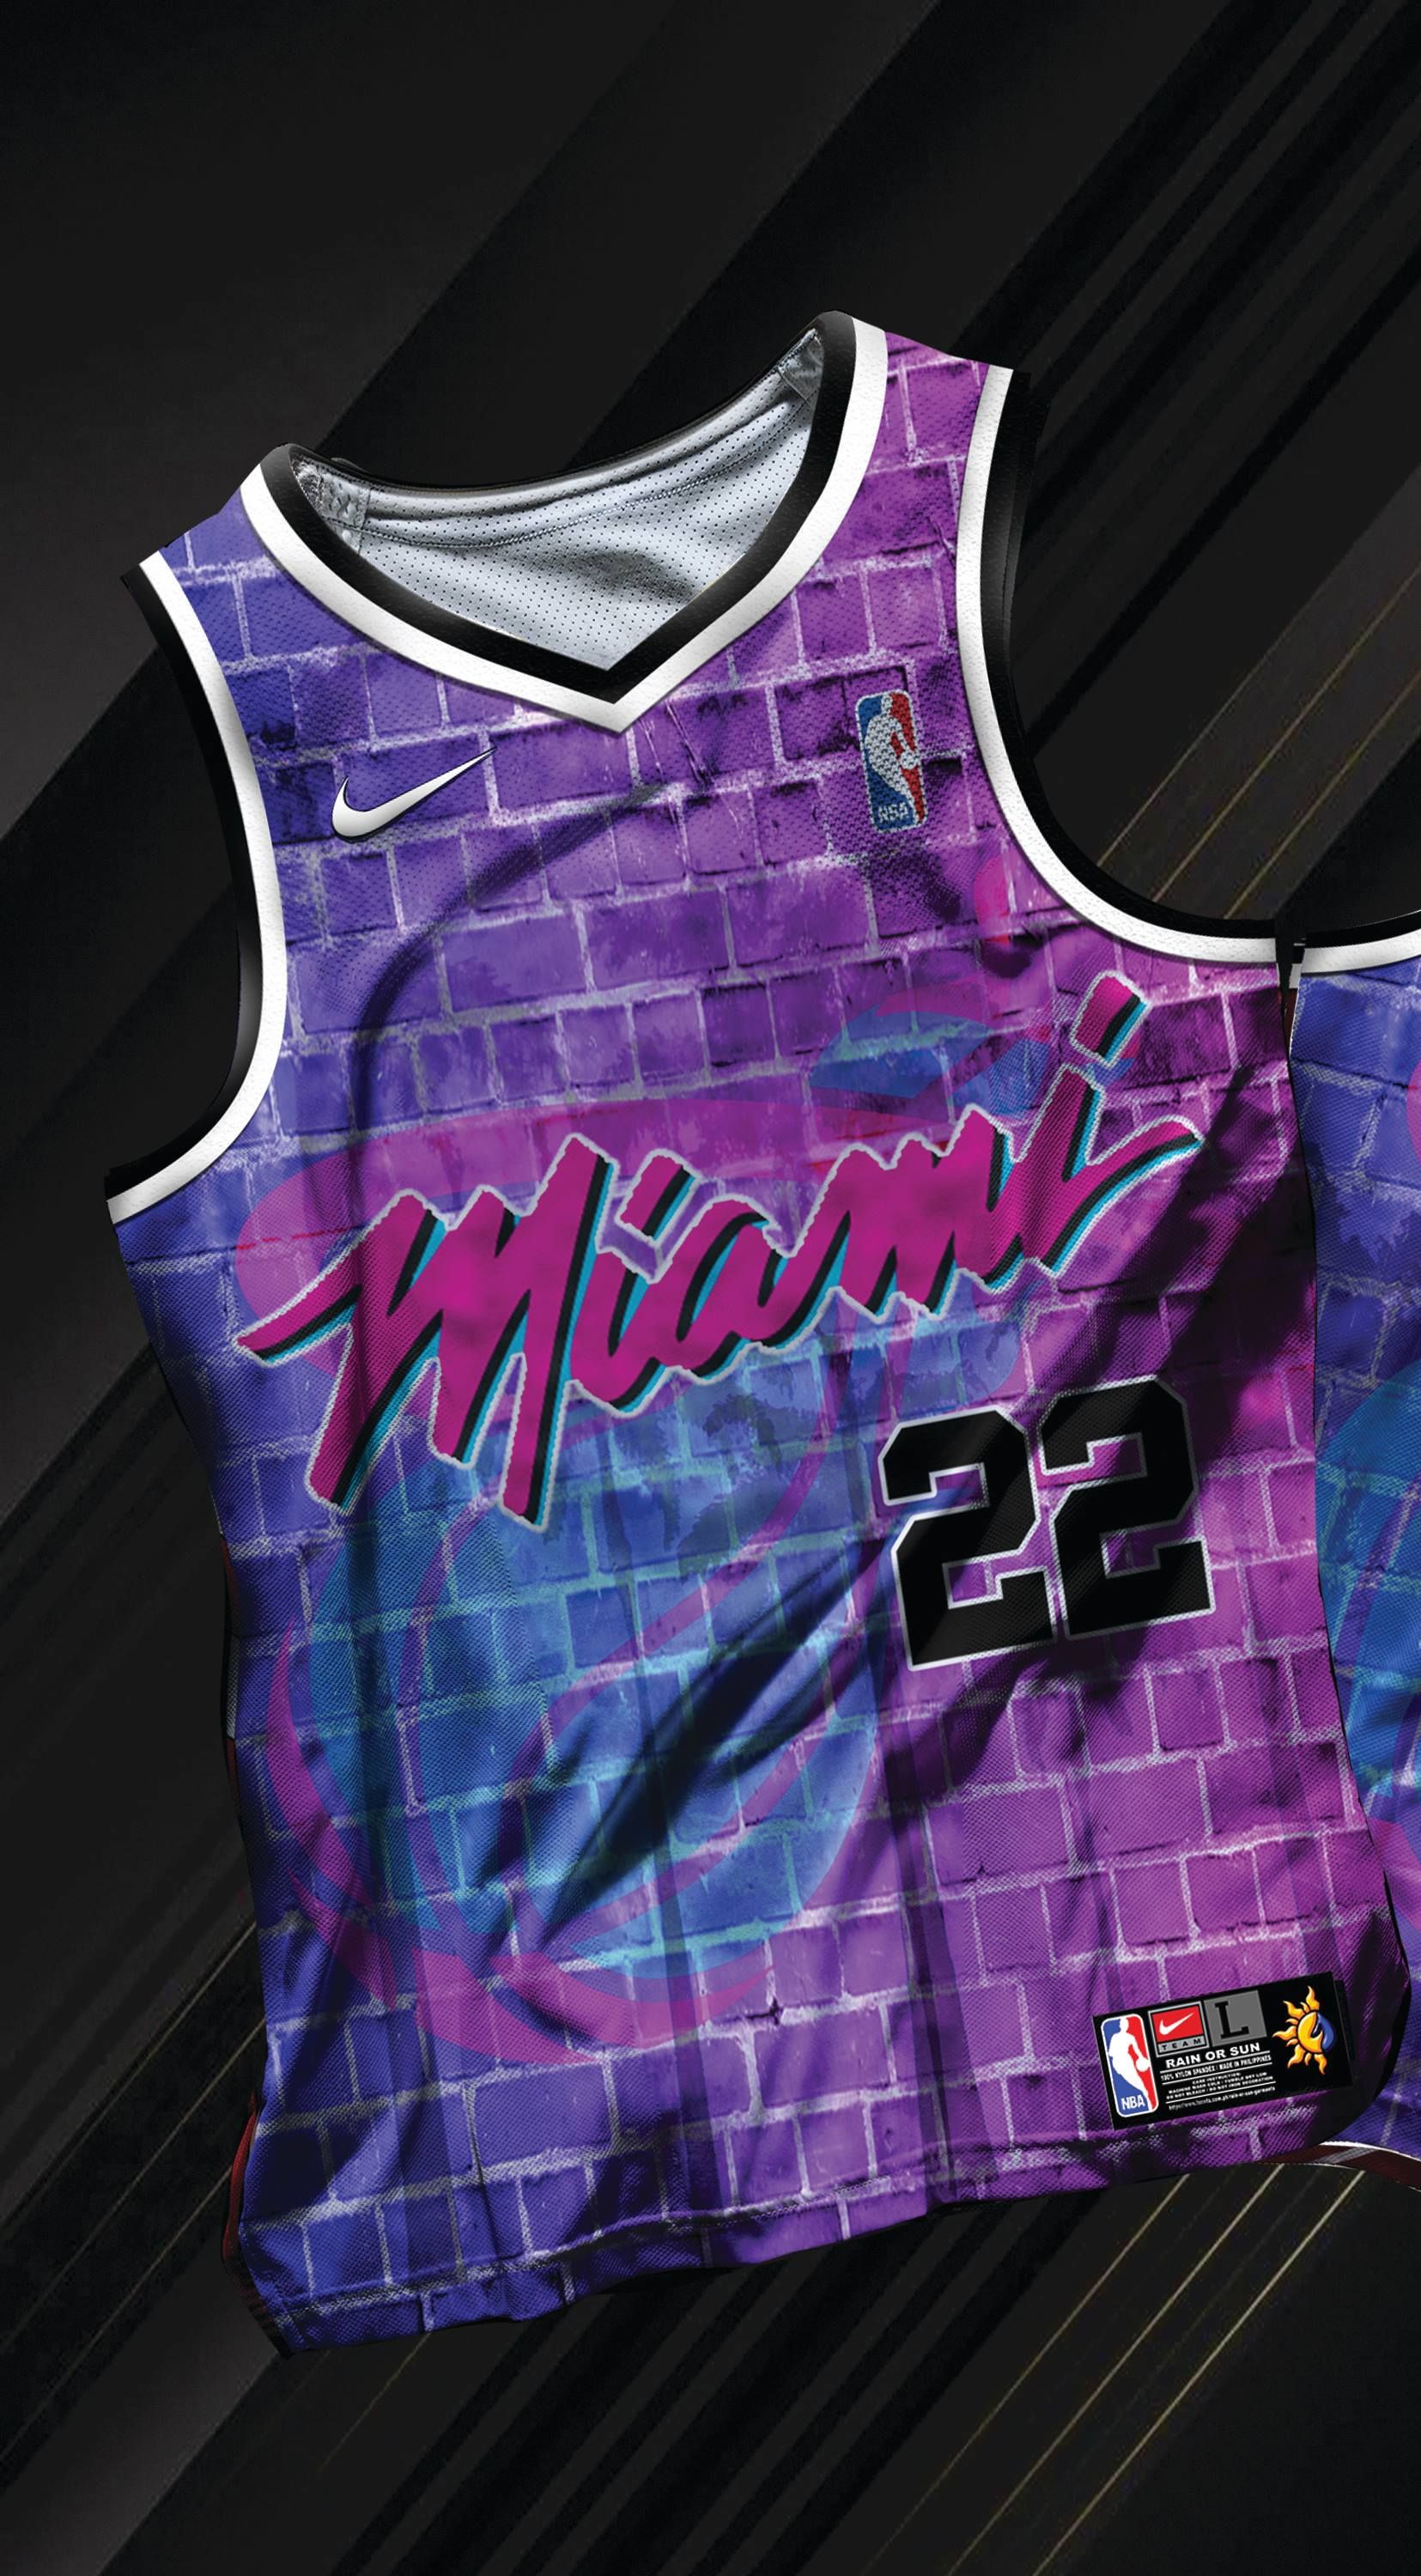 NEW EDITION MIAMI 04 JIMMY BUTLER JERSEY FREE CUSTOMIZE OF NAME&NUMBER ONLY  full sublimation with high quality fabrics basketball jersey/trend jersey/ jersey